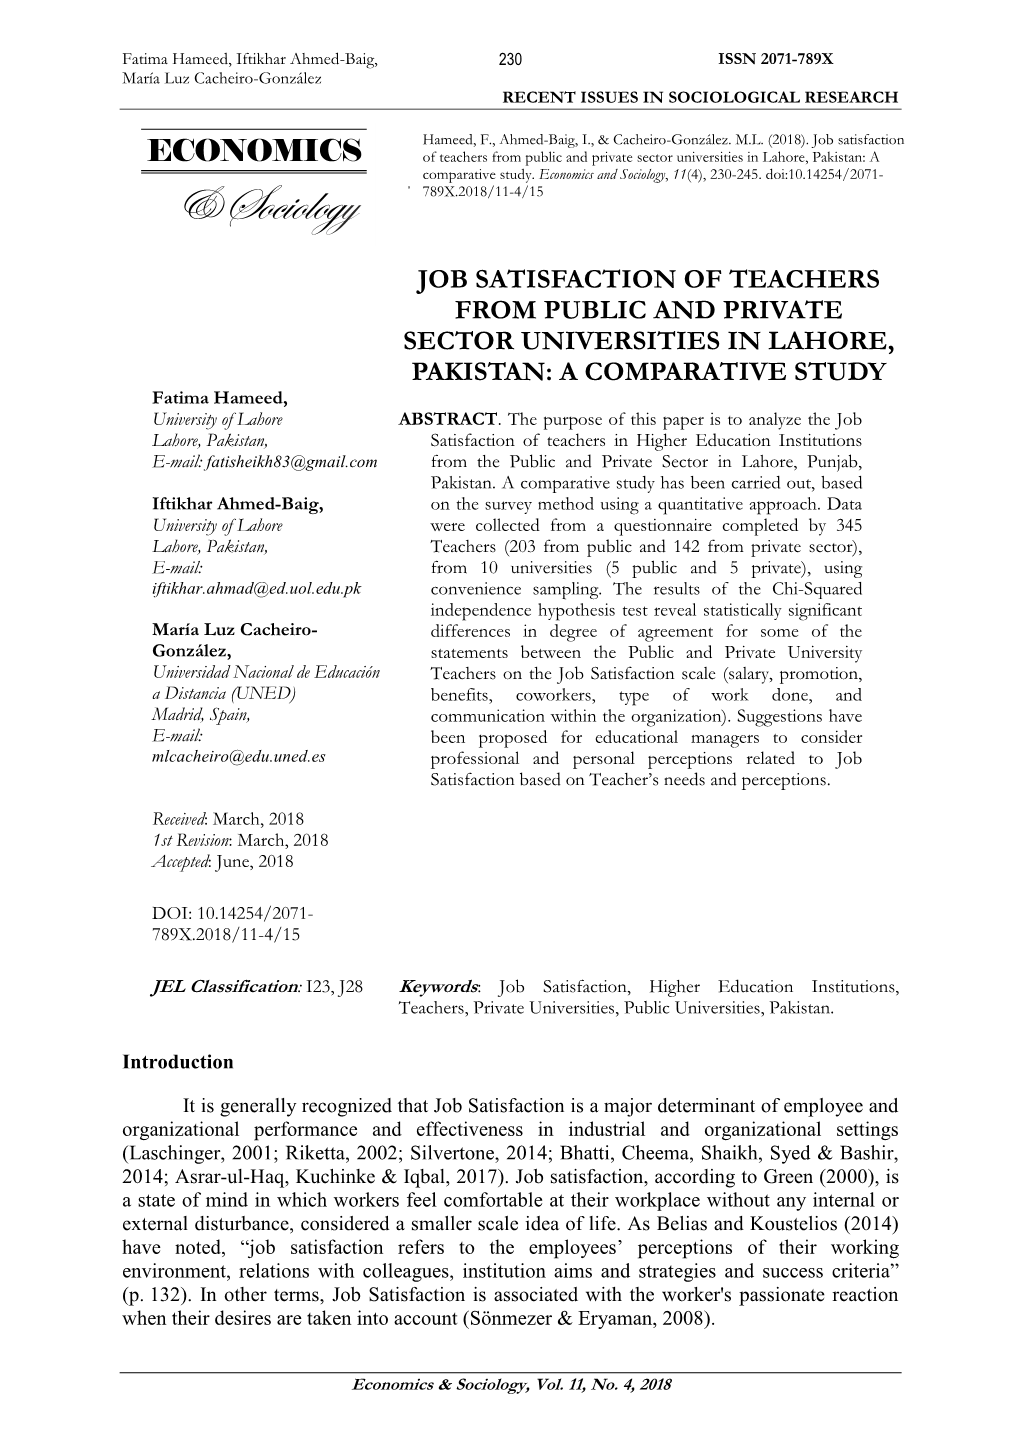 Job Satisfaction of Teachers from Public and Private Sector Universities in Lahore, Pakistan: a Comparative Study